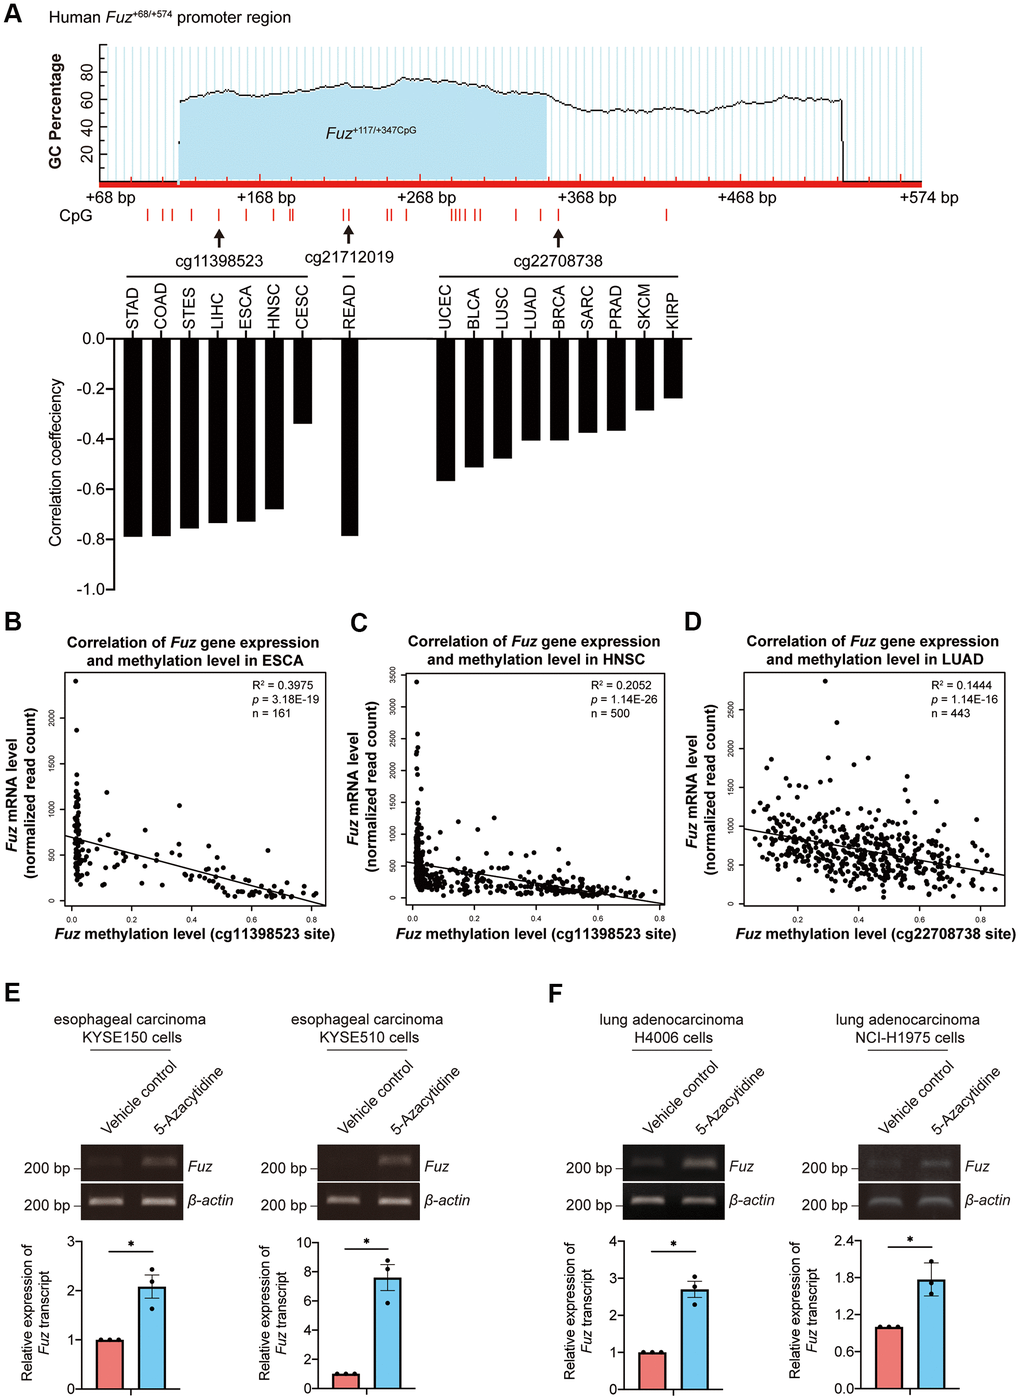 Fuz expression was associated with its promoter methylation level in ESCA and LUAD tumor samples. (A) Fuz methylation data obtained from Firebrowse database indicates that Fuz mRNA level was negatively associated with its promoter methylation level in various types of cancer. Three methylation sites (cg11398523, cg21712019 and cg22708738) were highlighted, and these sites reside within or close to a potential CpG island (Fuz+117/+347CpG) in Fuz+68/+574 promoter region. The CpG island Fuz+117/+347CpG was predicted using MethPrimer software (https://www.urogene.org/cgi-bin/methprimer/methprimer.cgi) [27]. (B, C) Fuz mRNA level negatively correlates with the methylation at cg11398523 site within Fuz promoter in ESCA (B) and HNSC (C) patient samples. (D) A negative correlation between Fuz expression and Fuz promoter methylation level (at cg22708738 site) was identified in LUAD patient samples. (E) Treatment of 5-Azacytidine upregulated Fuz transcript level in esophageal carcinoma KYSE150 and KYSE510 cell lines. (F) Fuz transcript level was increased upon treatment of 5-Azacytidine in lung adenocarcinoma H4006 and NCI-H1975 cell lines. n = 3 biological replicates. Each n represents an independent preparation of cell RNA samples. Error bars represent S.E.M.. Statistical analysis was performed using two-tailed unpaired Student’s t-test. * denotes p 